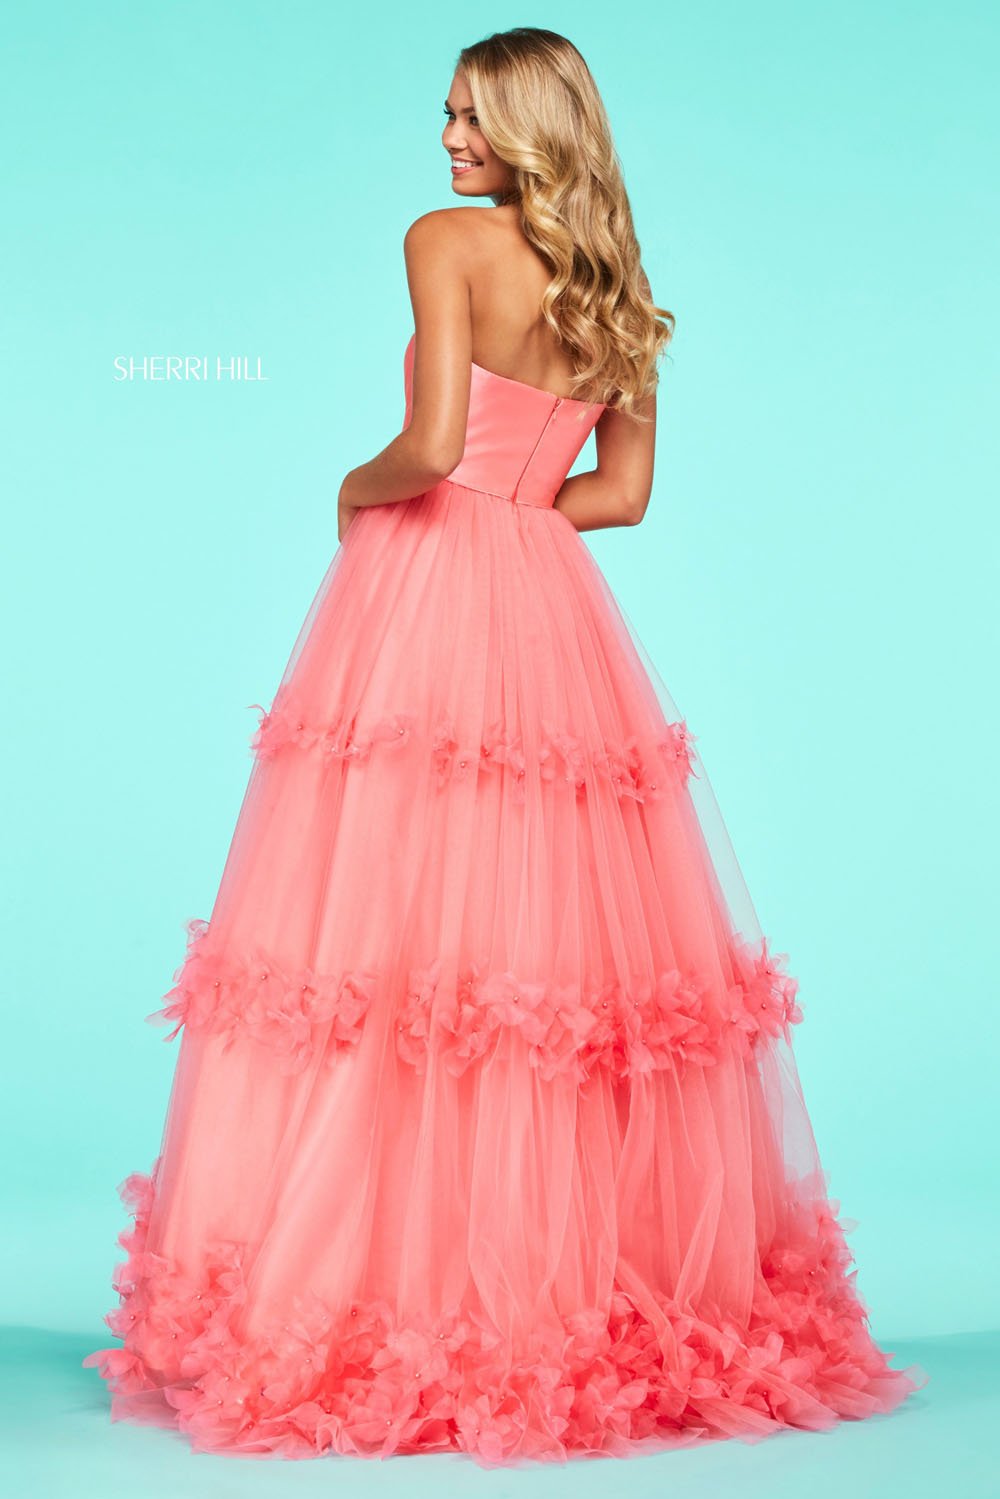 Sherri Hill 53420 dresses are available in the following colors: Light Blue, Pink, Yellow, Coral, Black, Ivory. $550 is the  best price guarantee